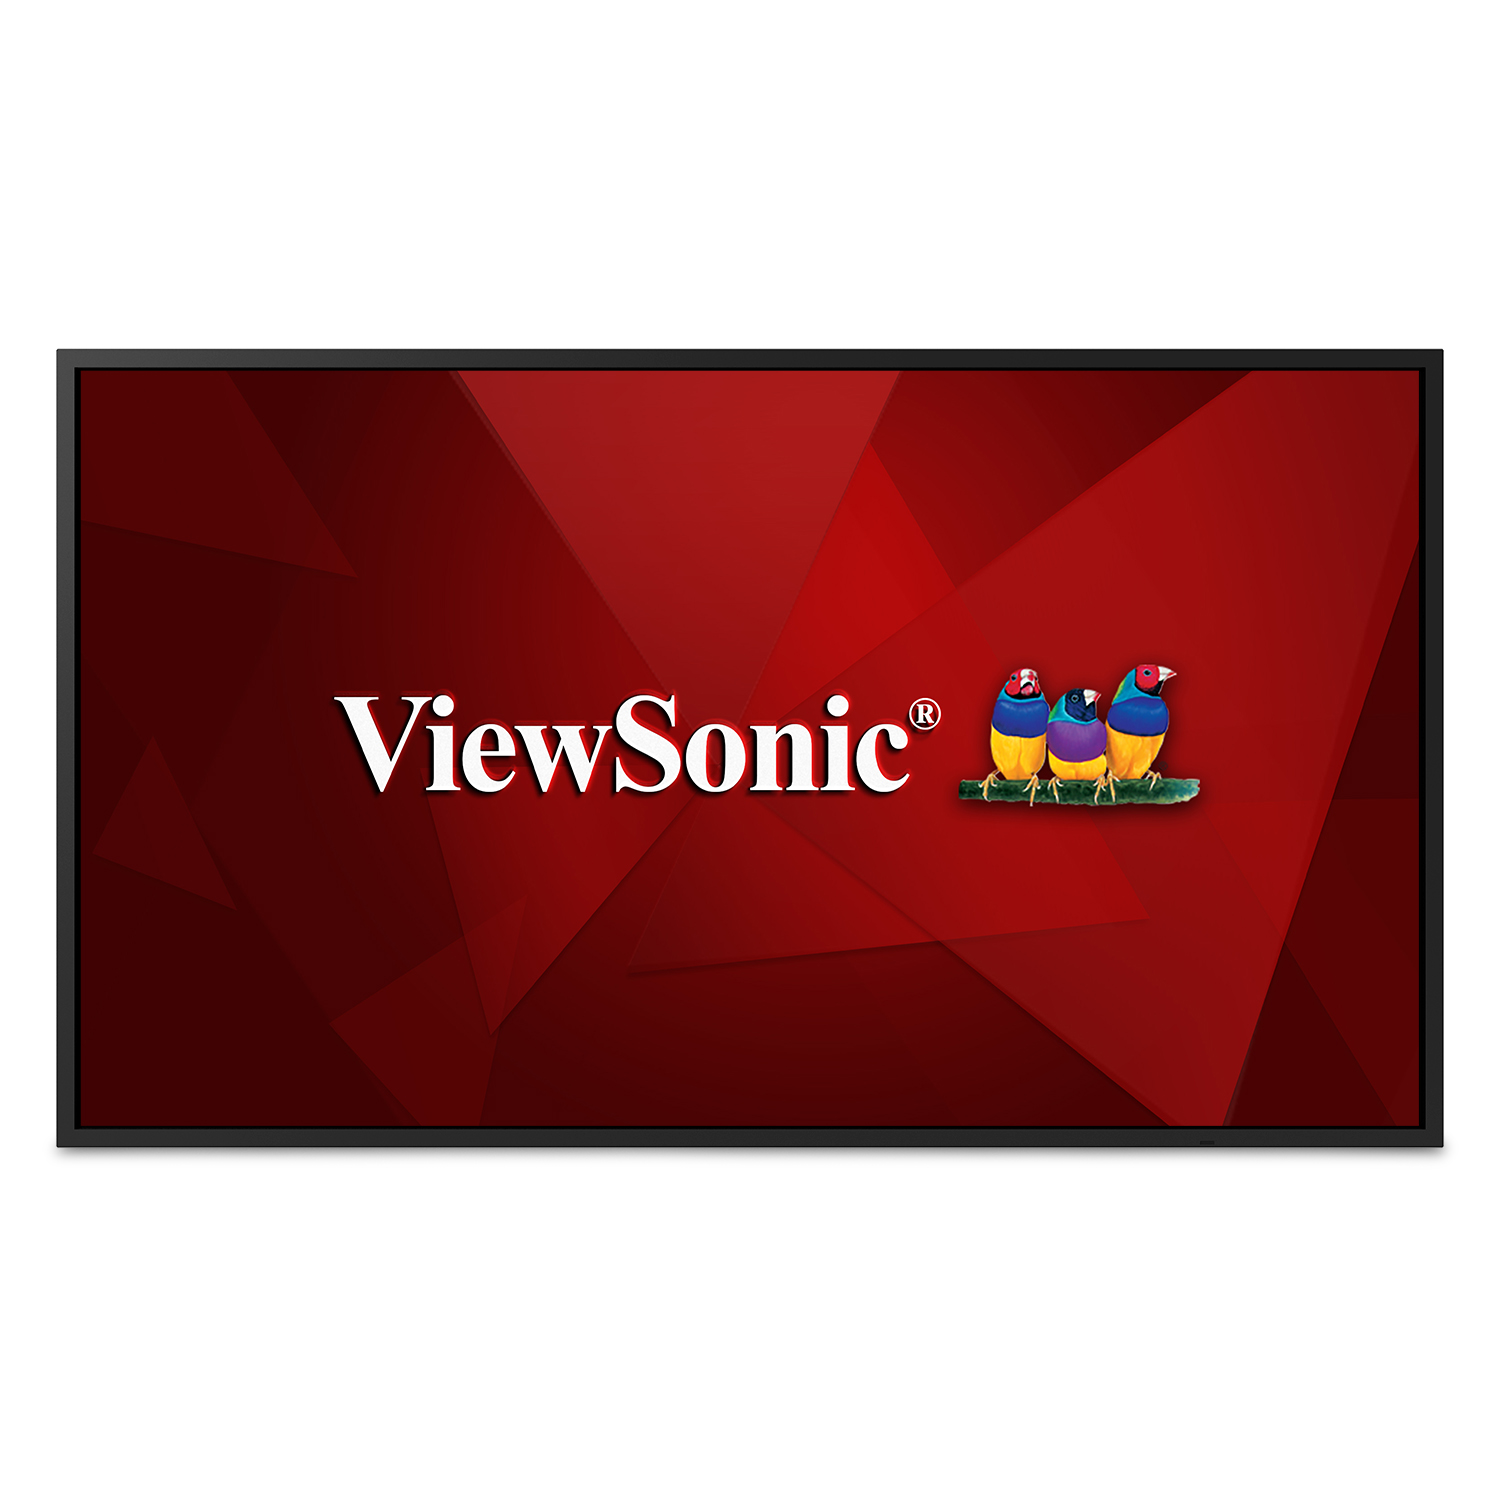 ViewSonic CDE4320 43 Inch 4K UHD Wireless Presentation Display with Integrated Quad Core Processor, 24/7 Operation Rating 16GB Storage Screen Sharing RJ45 or Wi-Fi HDMI DVI VGA, No Base Stand - image 1 of 9